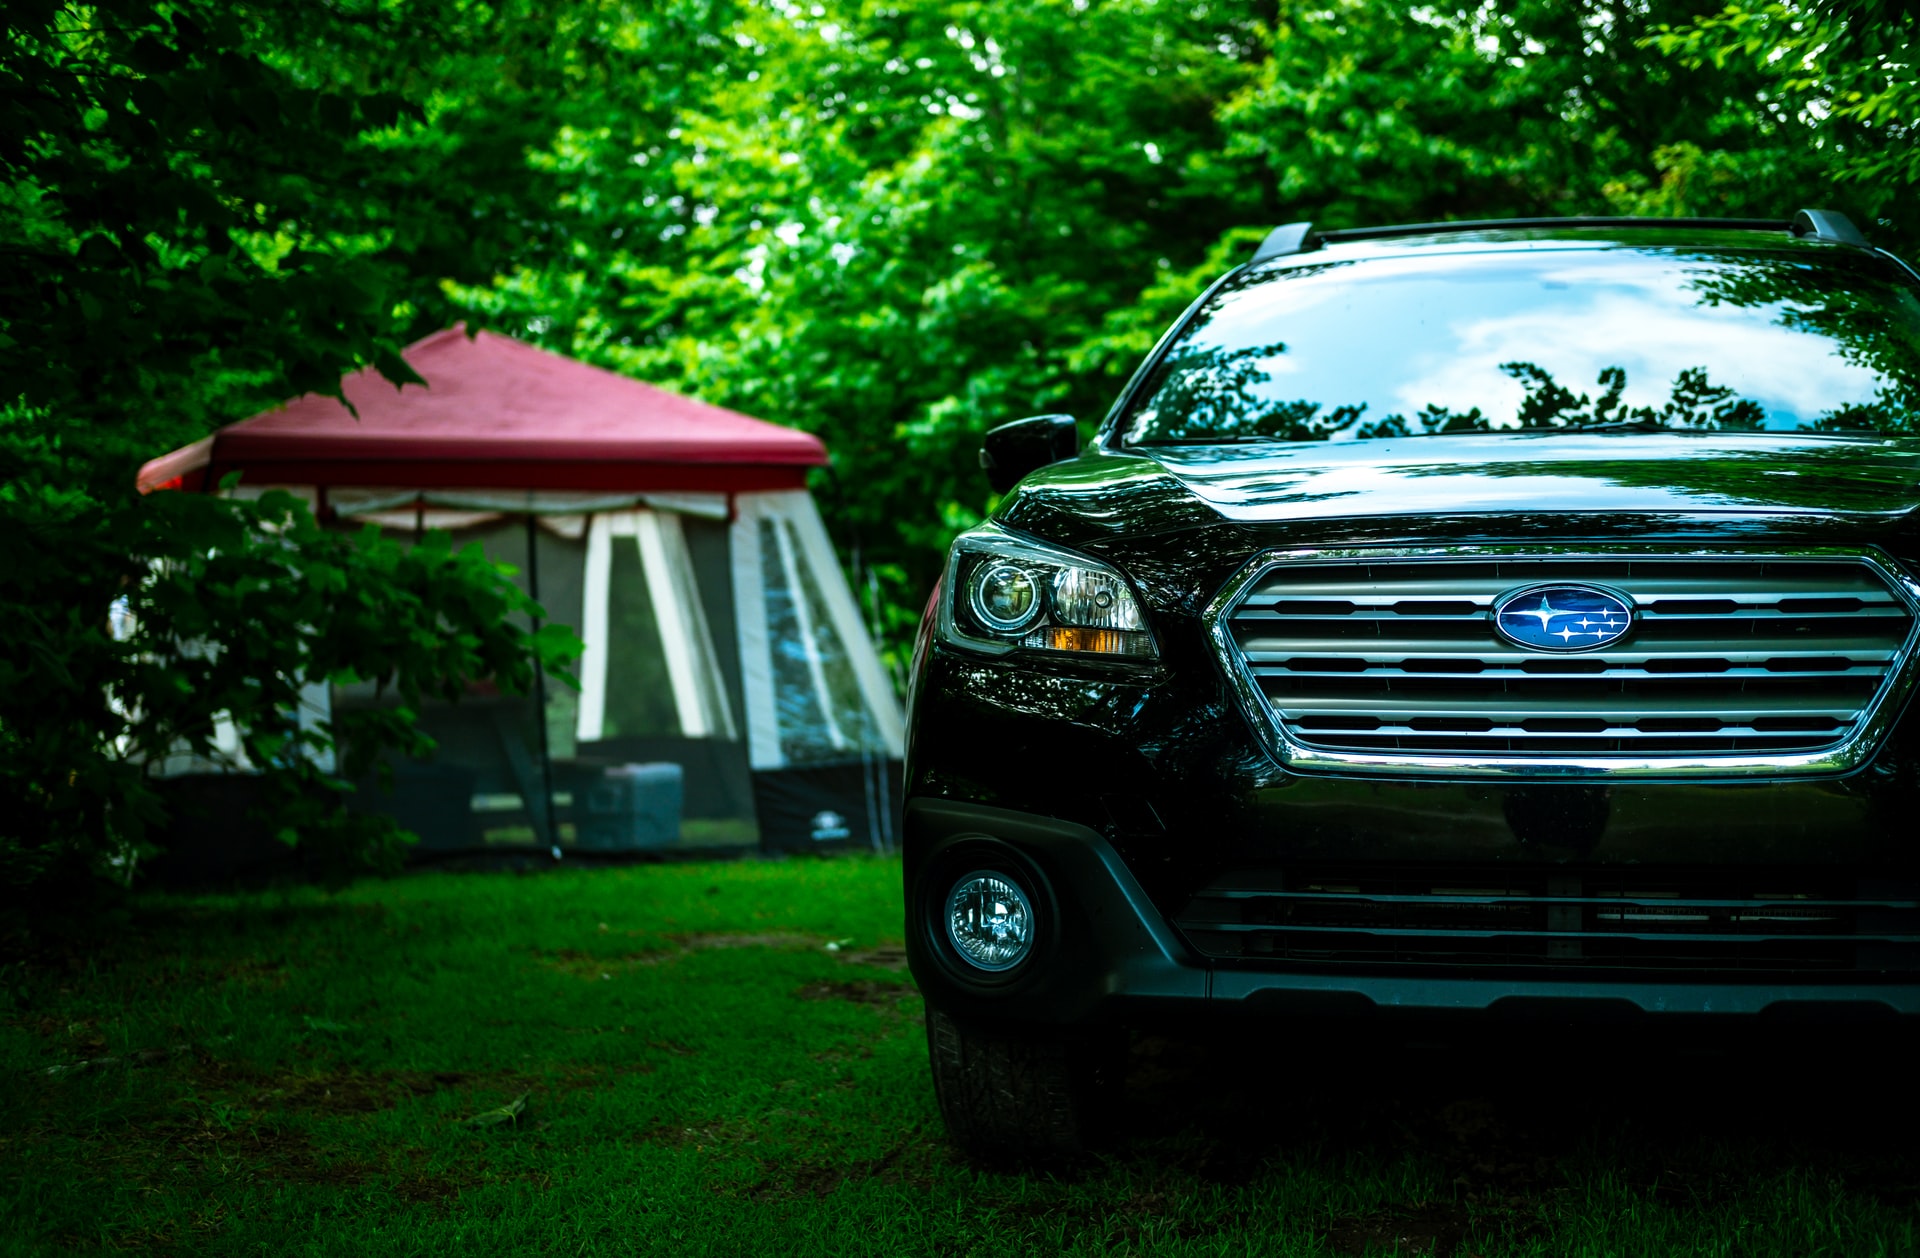 The 5 Best Kayak Racks for Subaru Outback: How to Choose